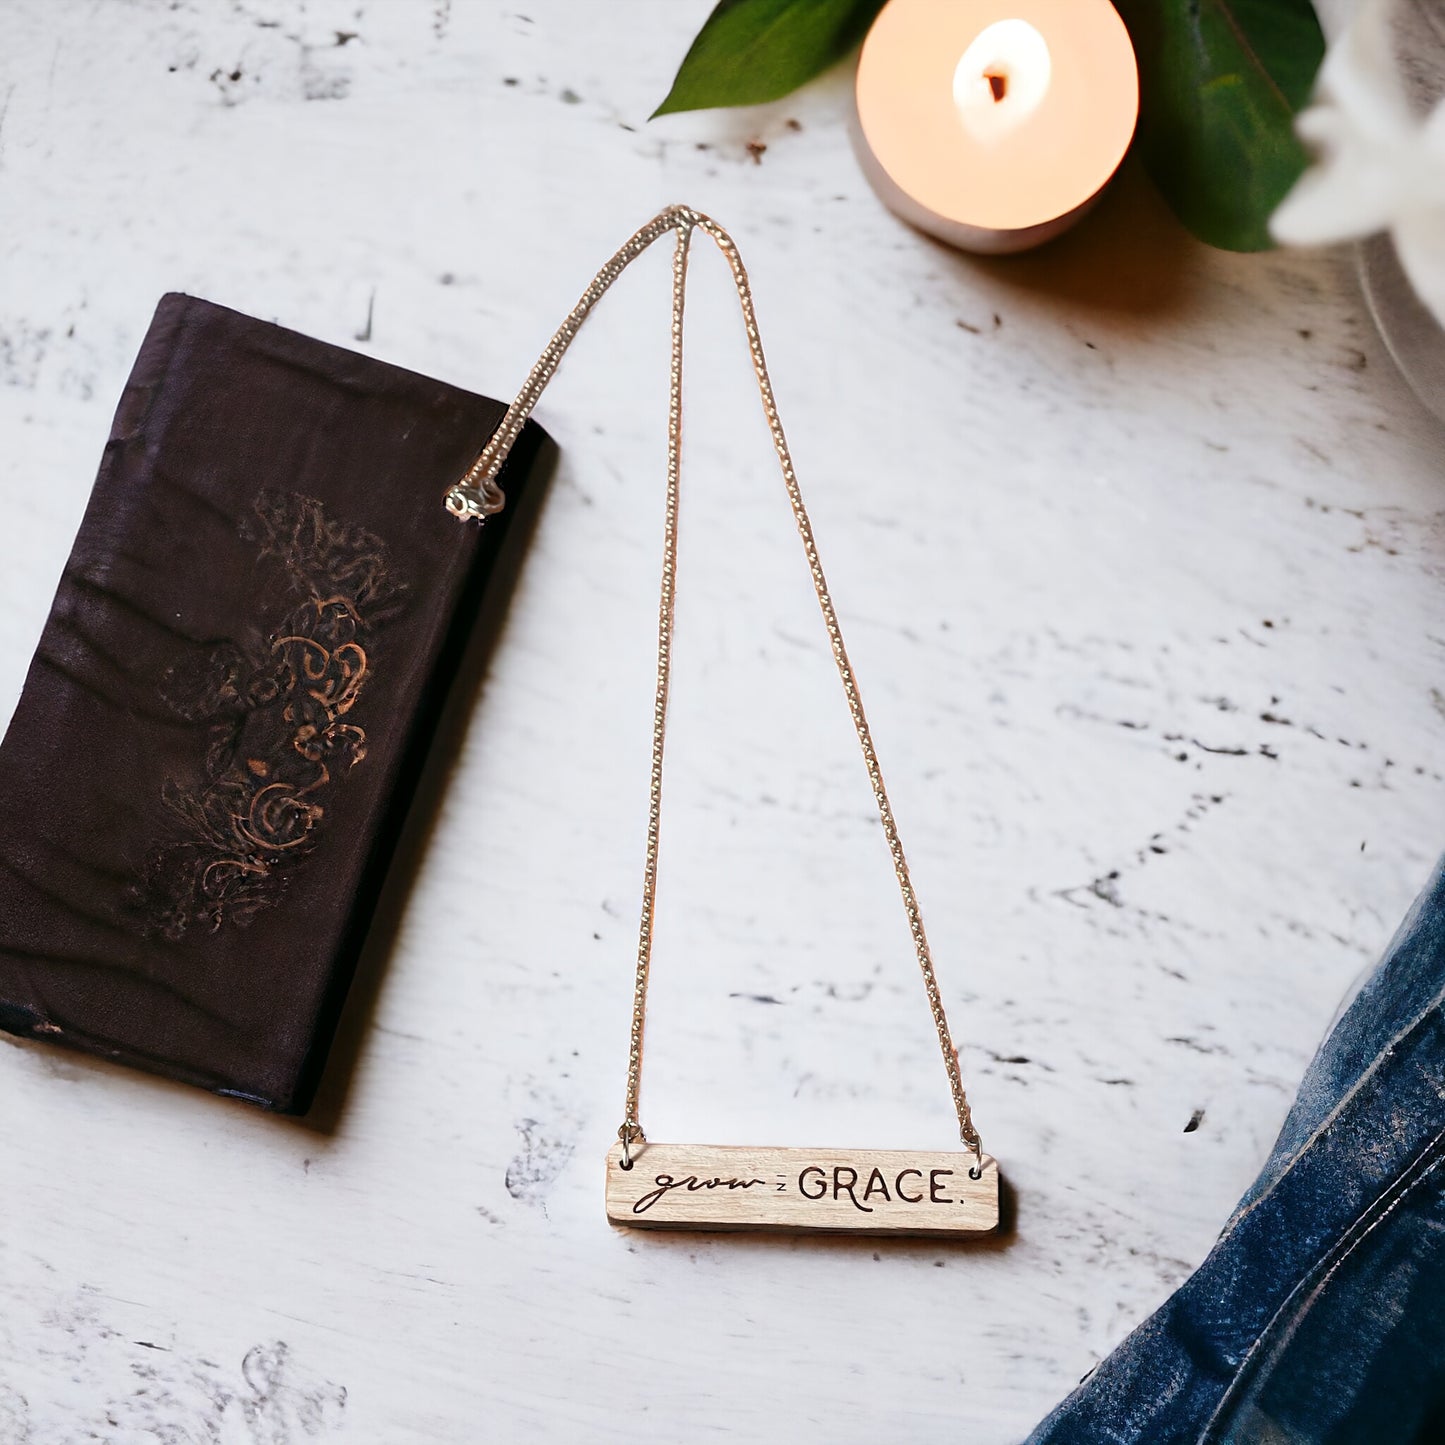 Grow in Grace Wooden Necklace